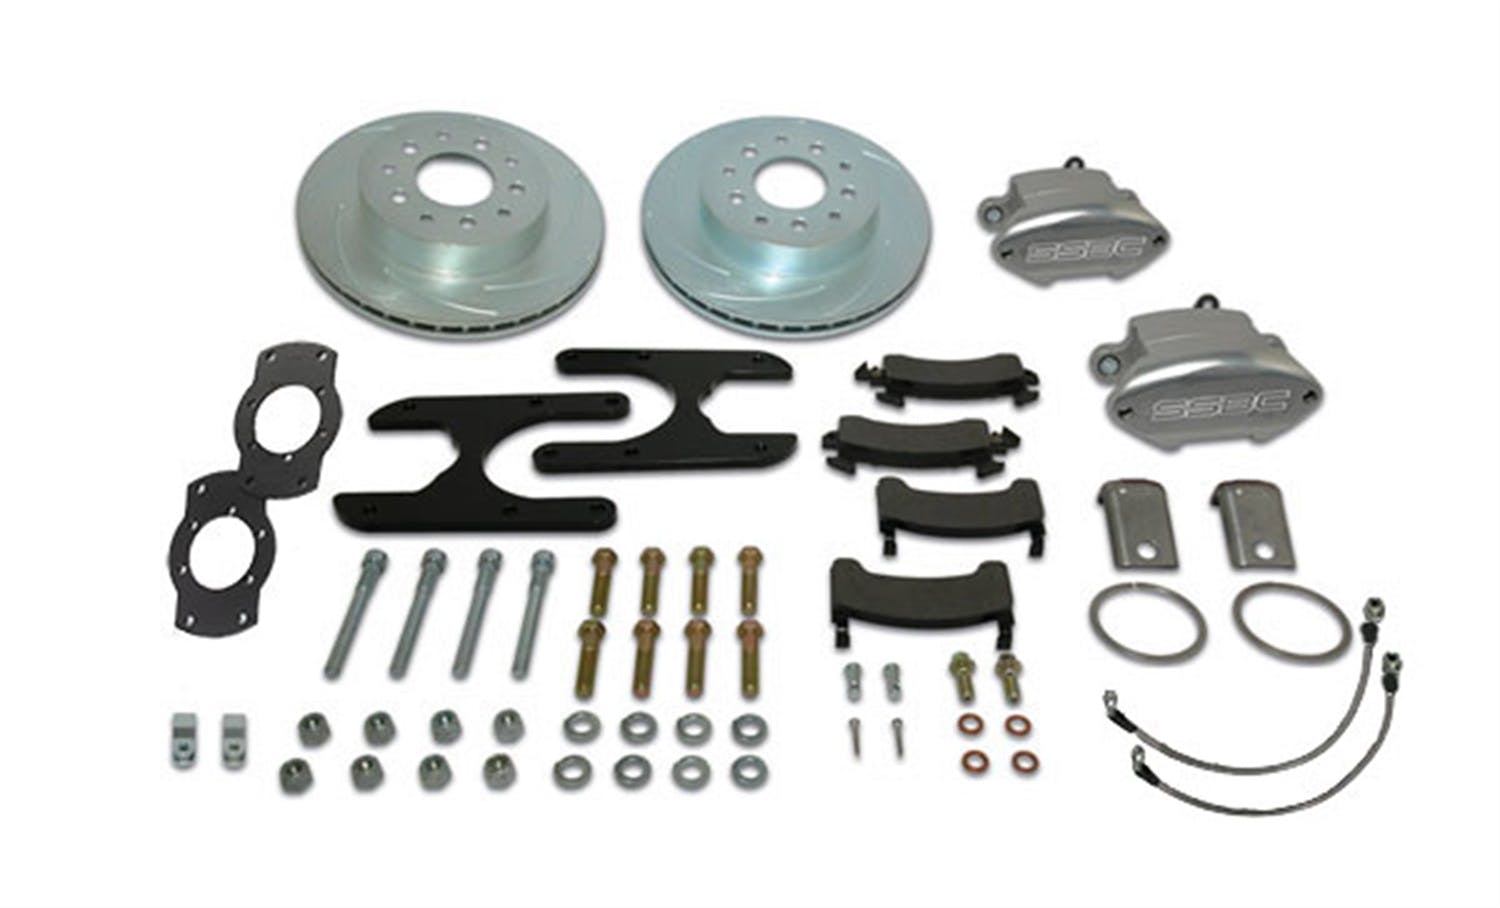 Stainless Steel Brakes A110-11R Kit A110-11 w/red calipers